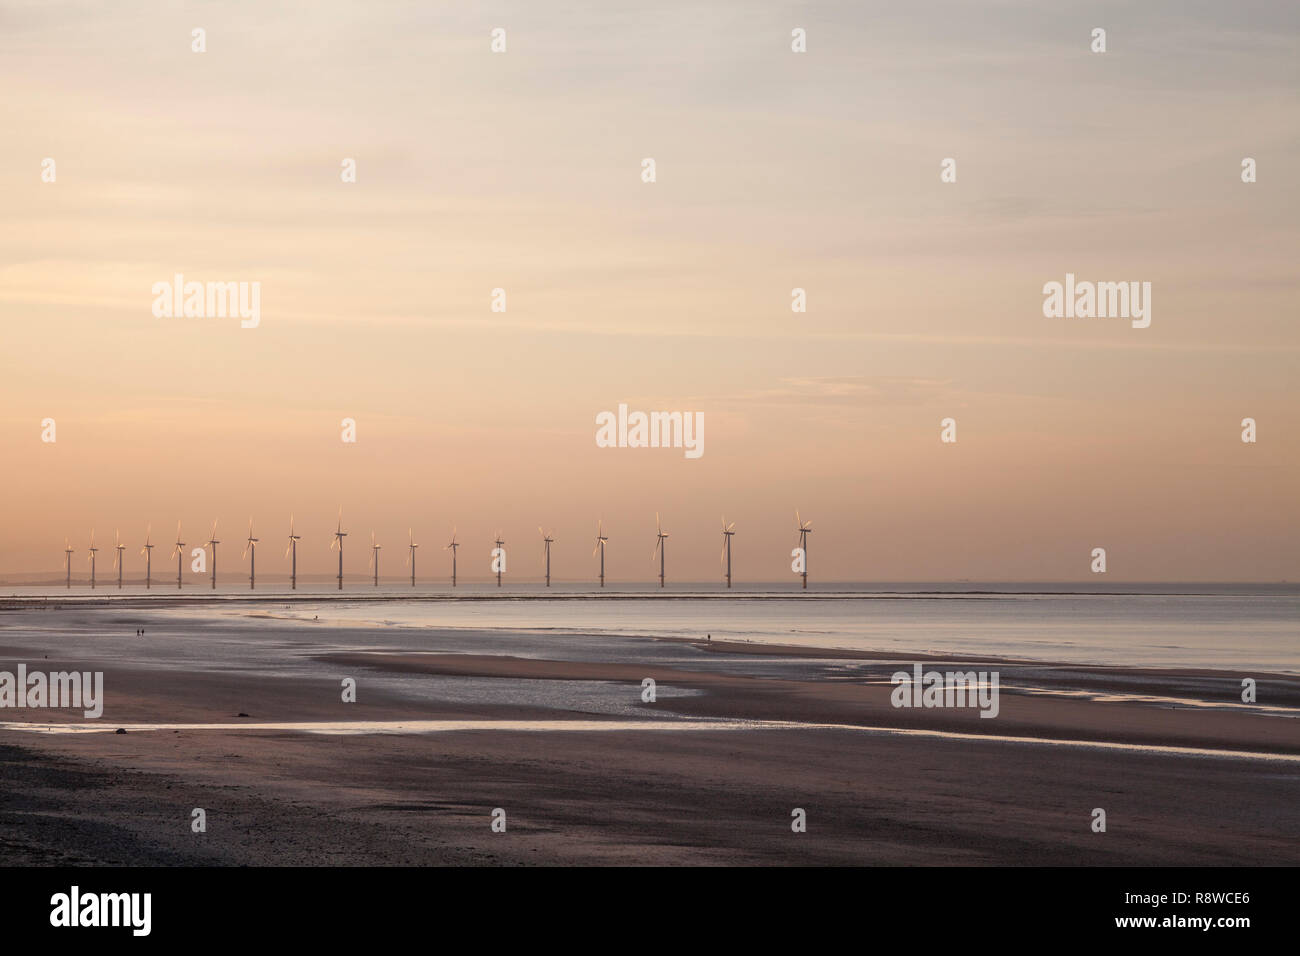 The wind farm at Redcar, Teesside, photographed at dusk. Stock Photo